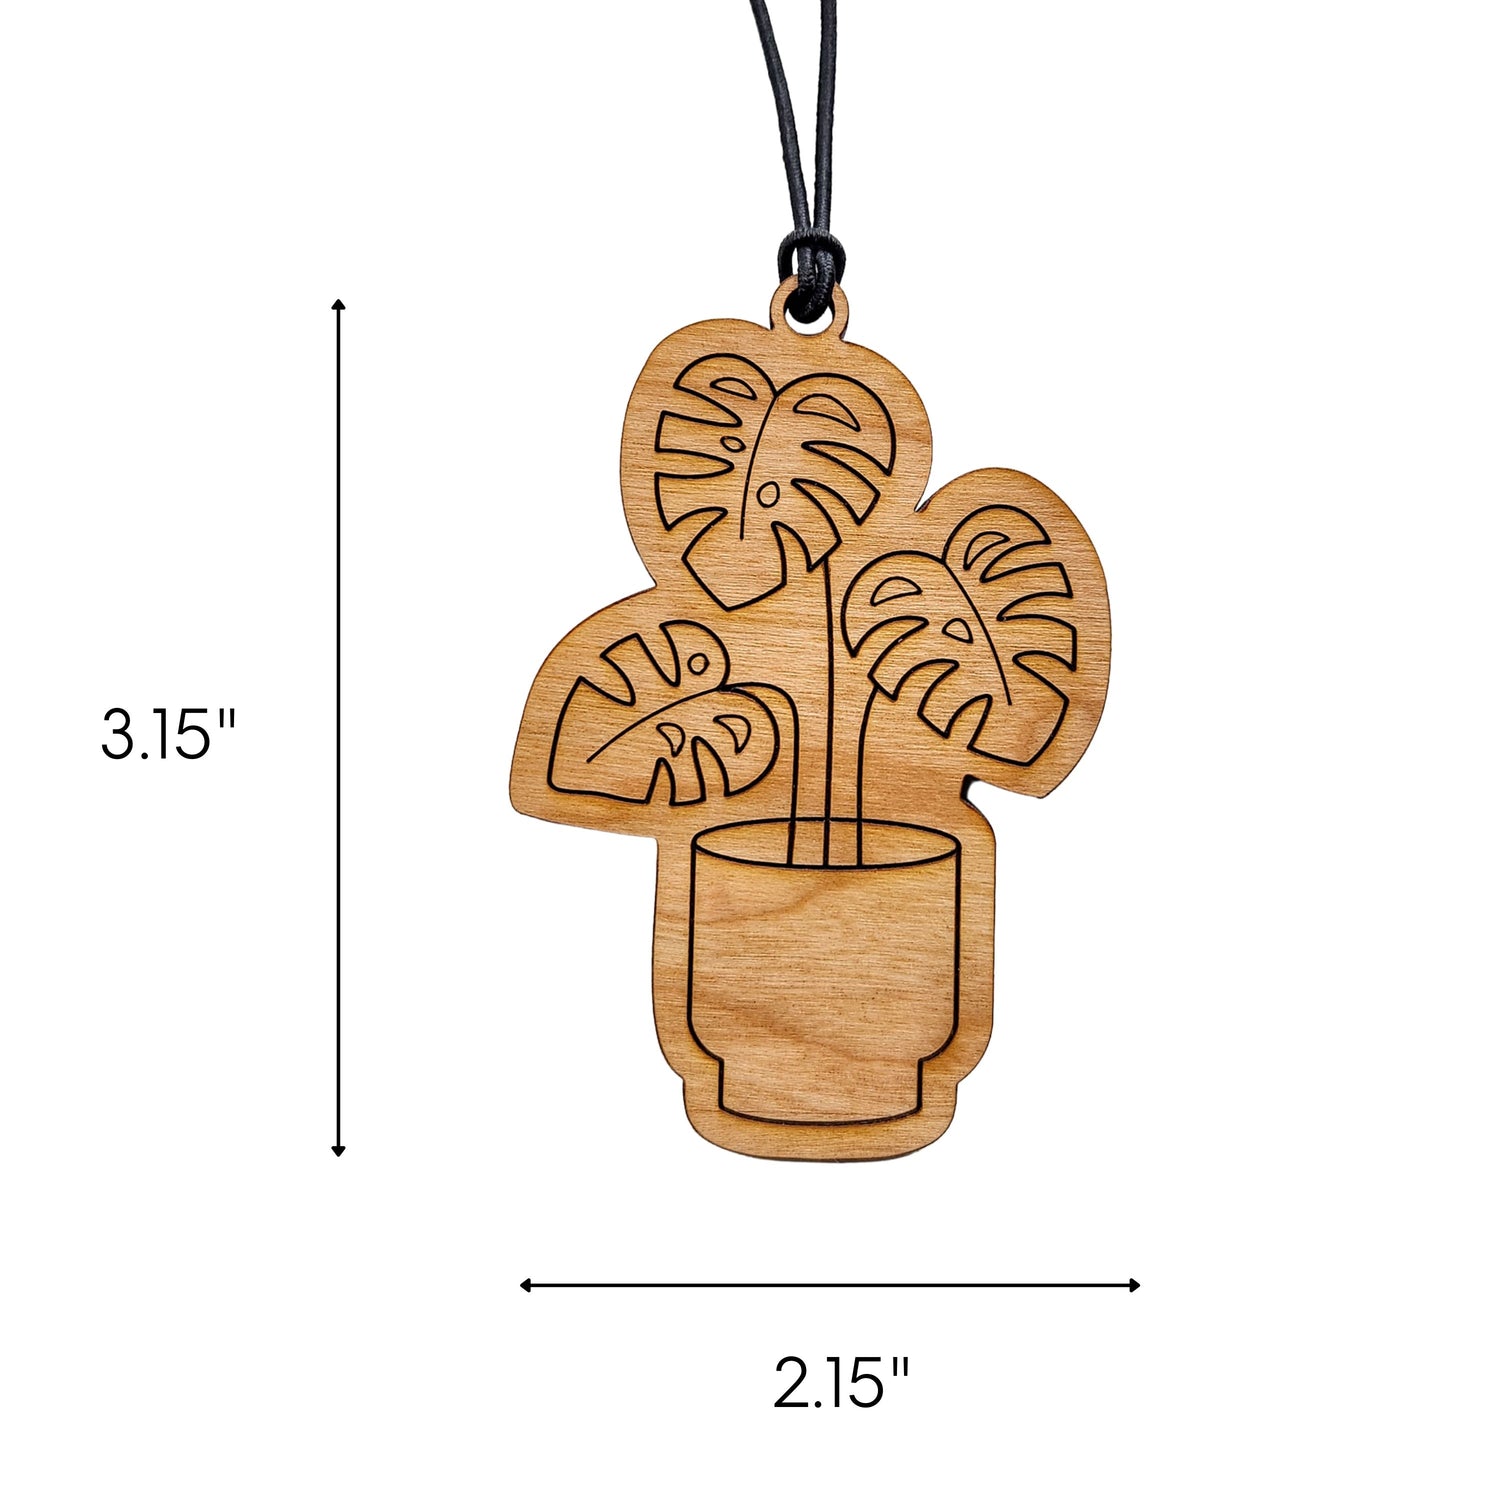 Wood Monstera Leaf Christmas Ornament - Houseplant Gift for Plant Lovers.